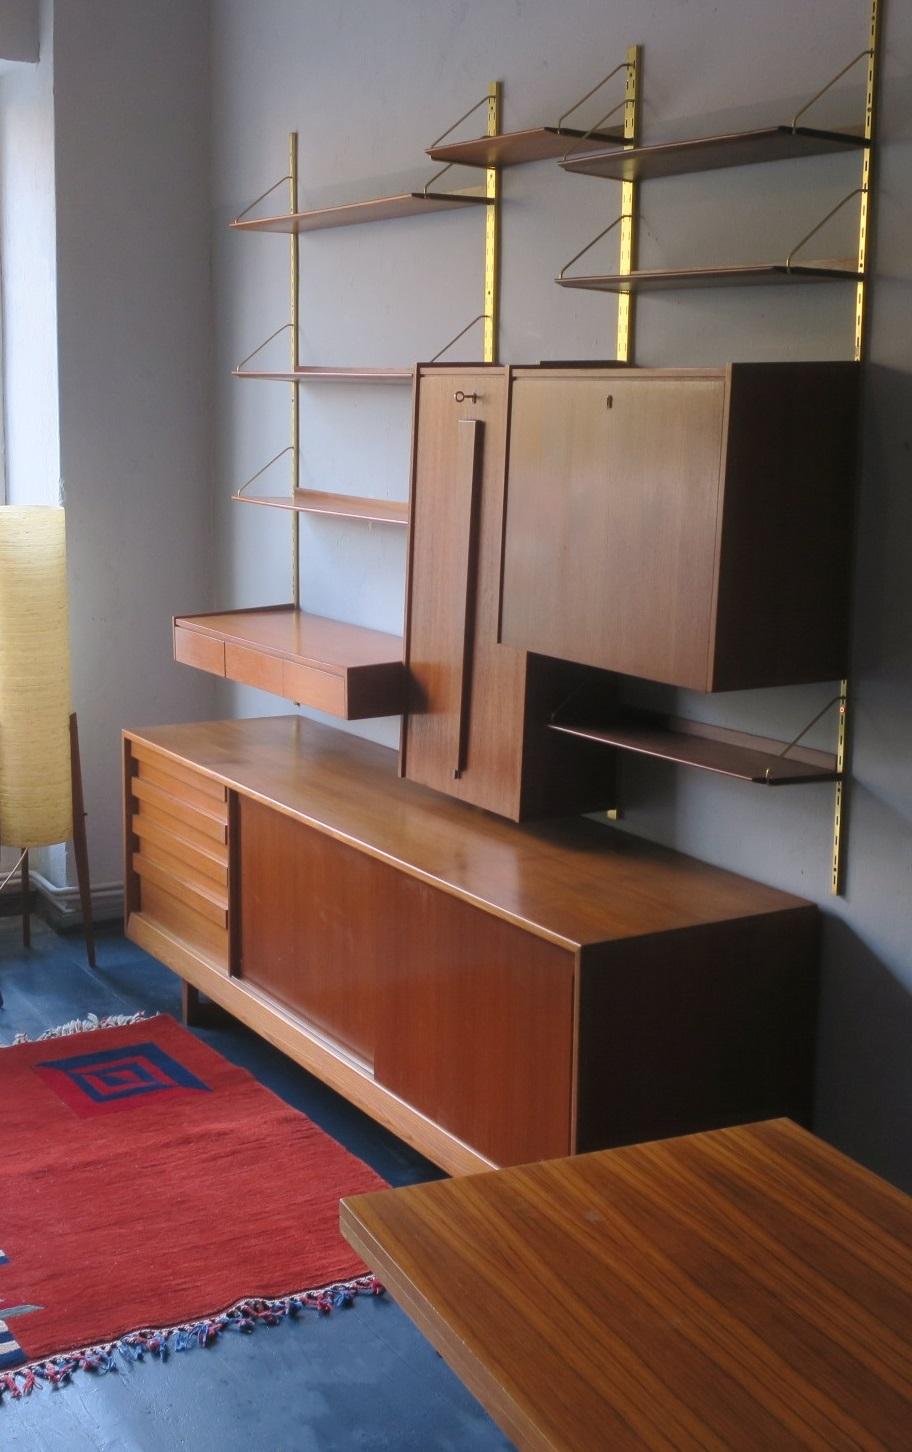 Midcentury Teak Modular Shelf System with Low Sideboard, 1960s For Sale 2